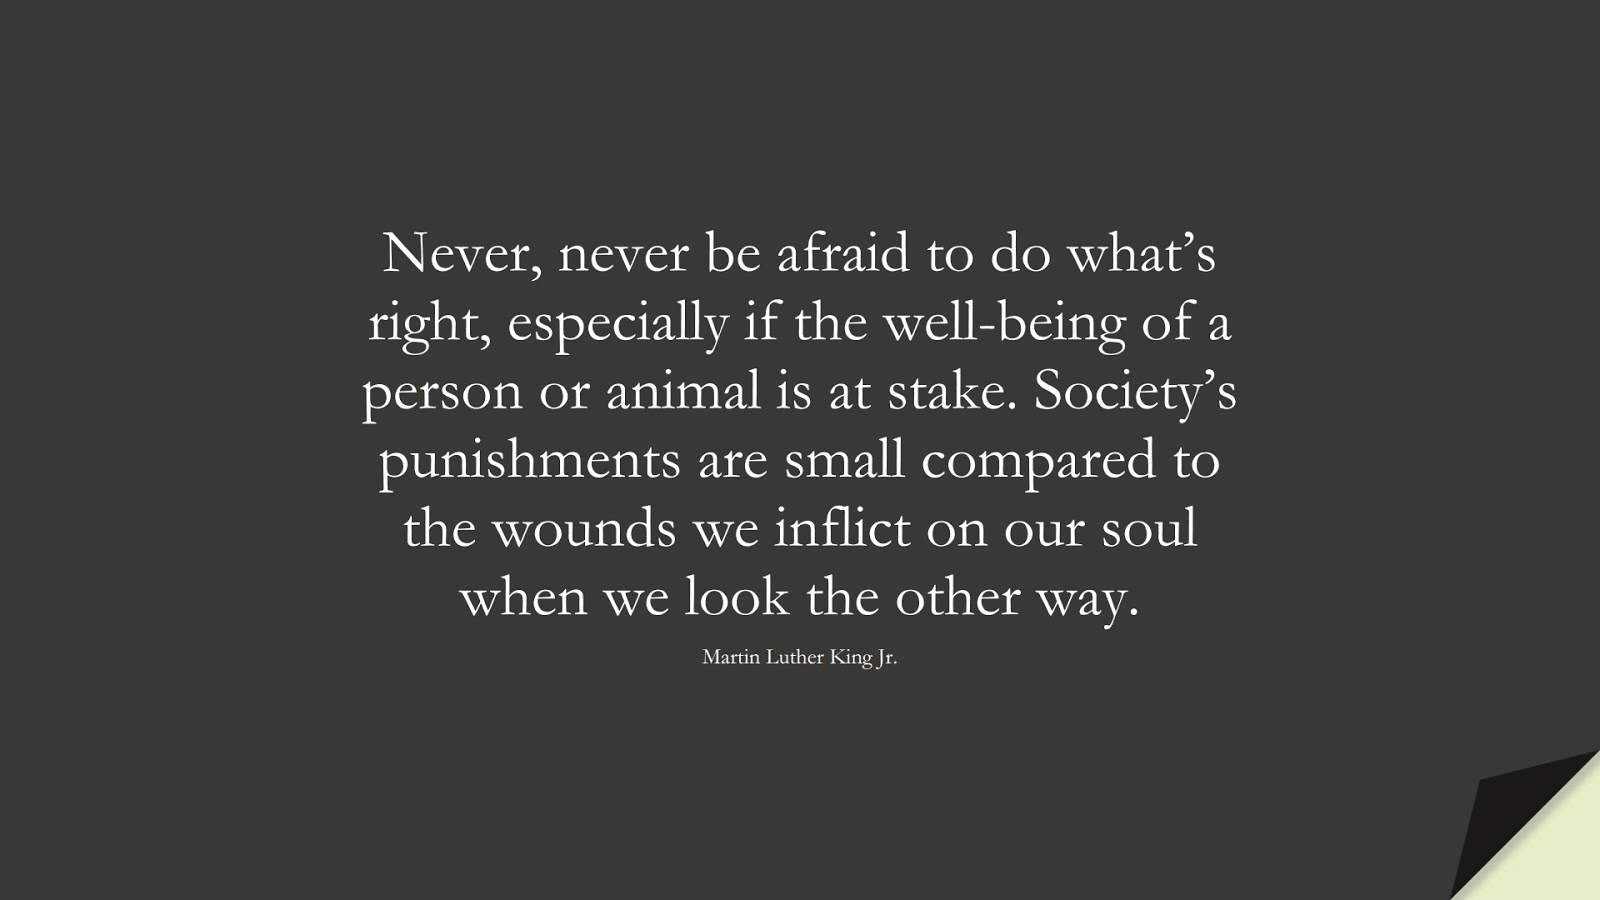 Never, never be afraid to do what’s right, especially if the well-being of a person or animal is at stake. Society’s punishments are small compared to the wounds we inflict on our soul when we look the other way. (Martin Luther King Jr.);  #MartinLutherKingJrQuotes